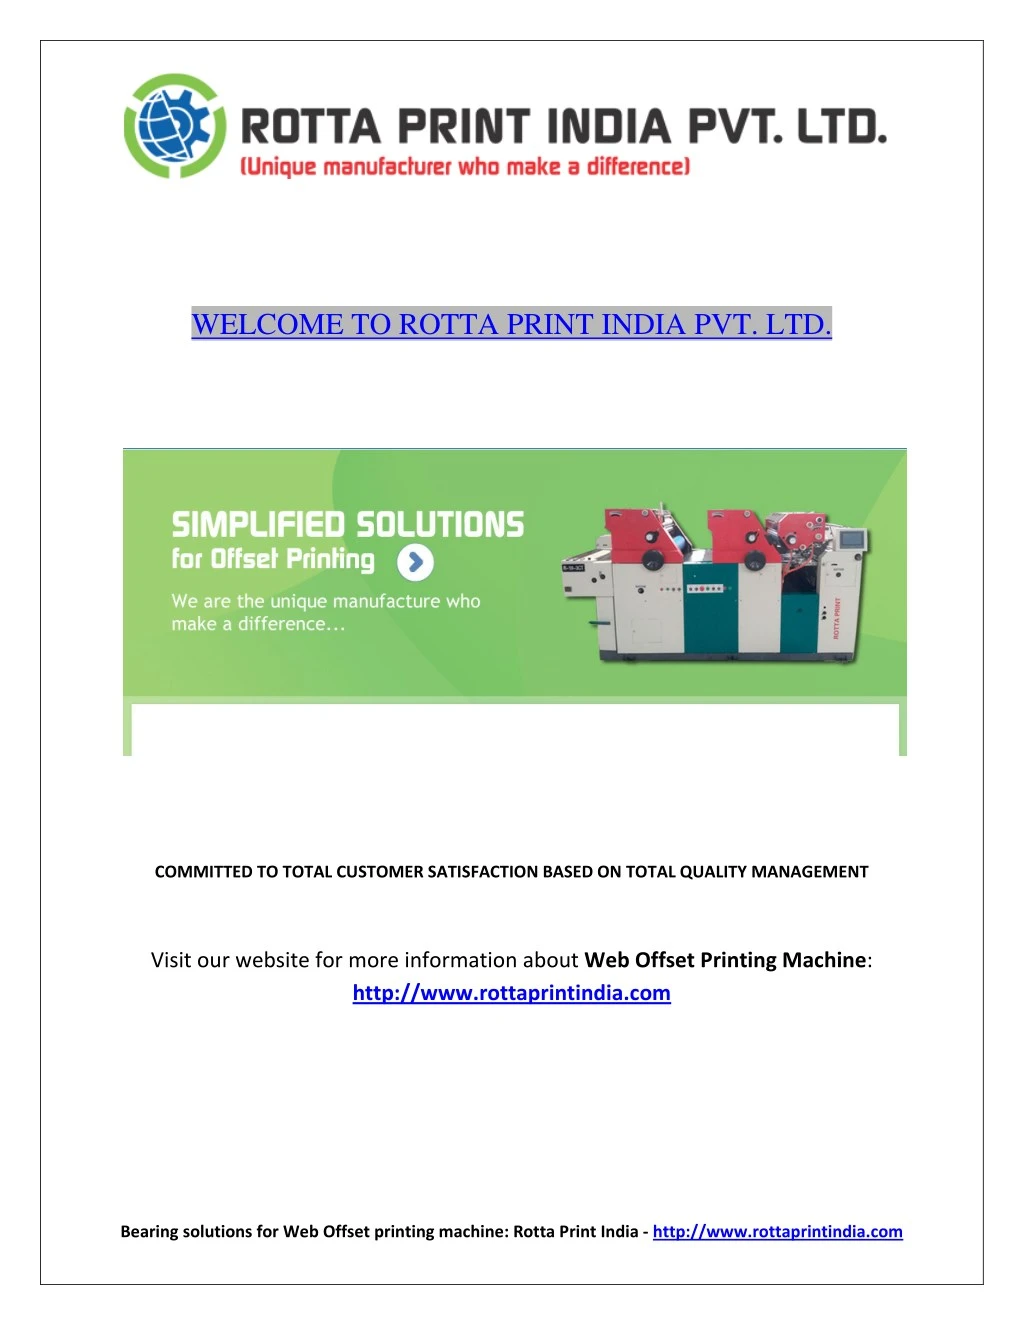 welcome to rotta print india pvt ltd